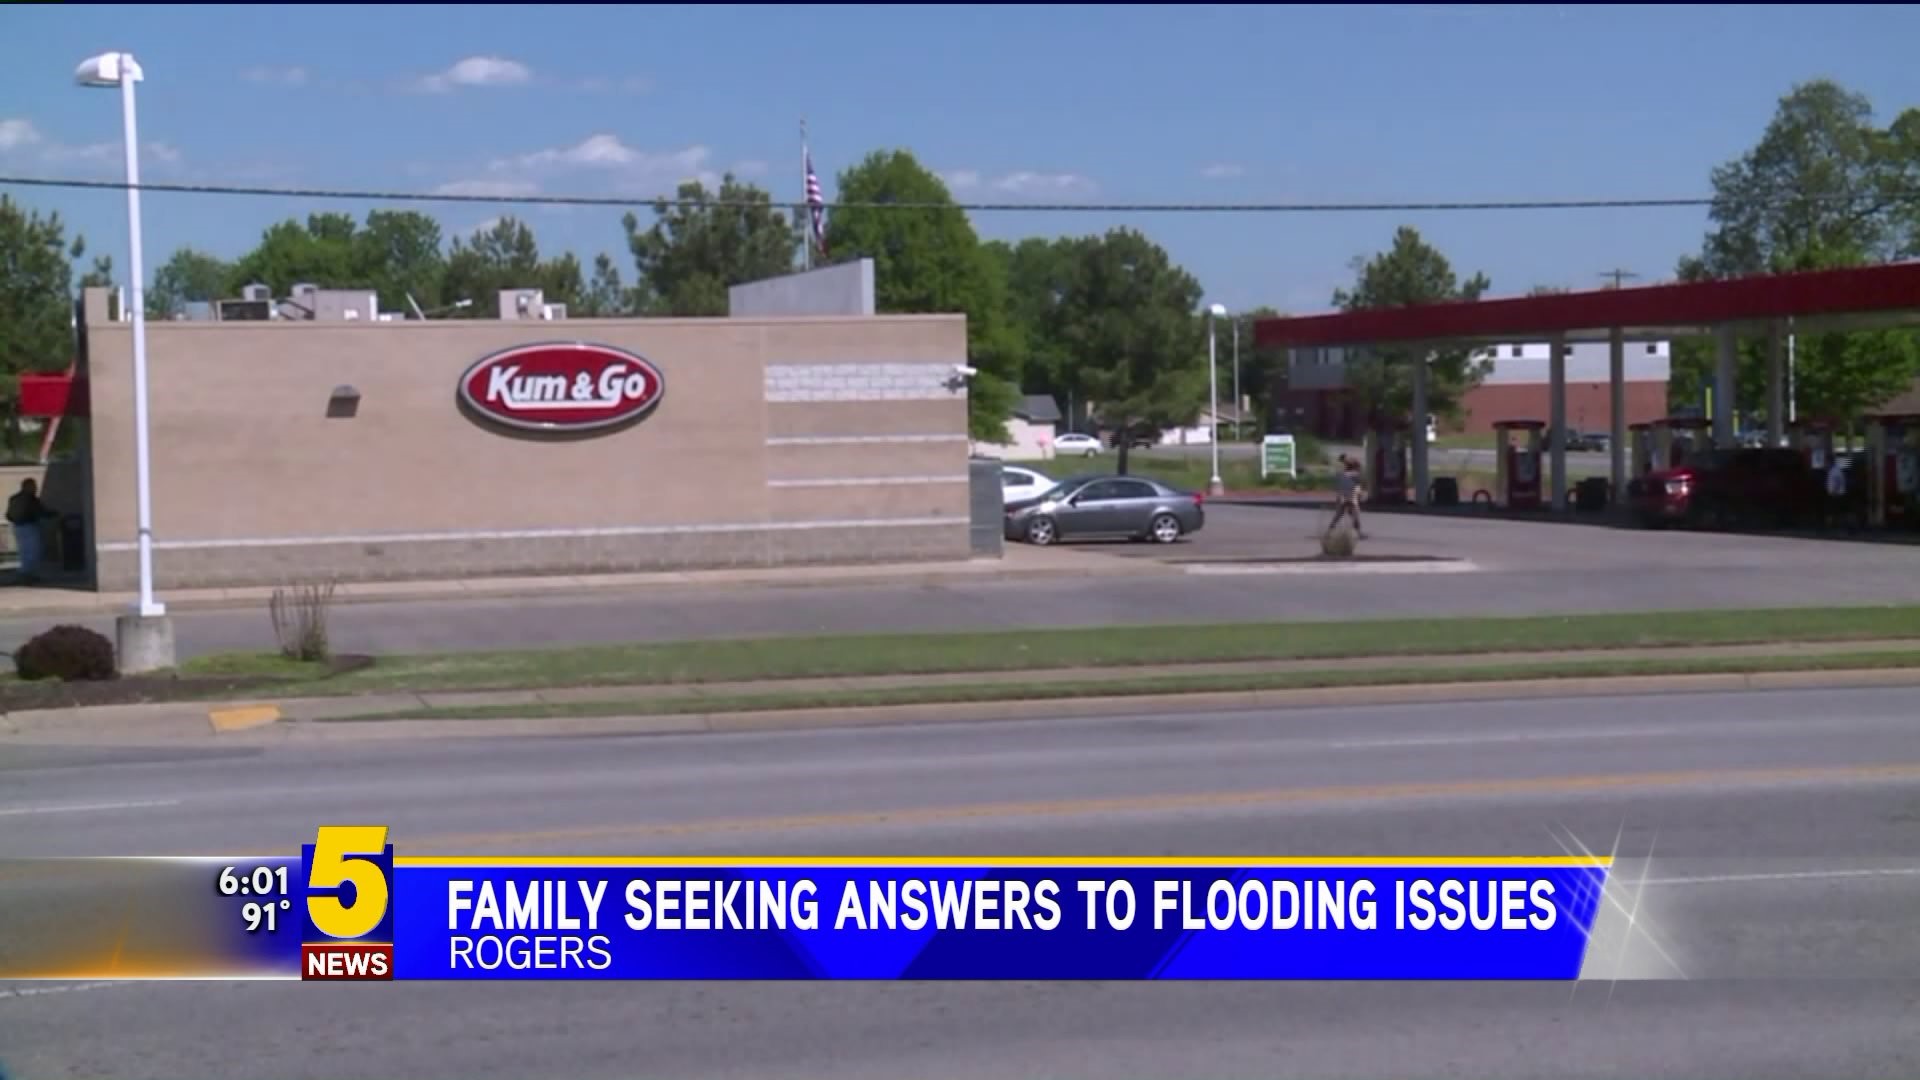 Family Seeking Answers To Flooding Issues